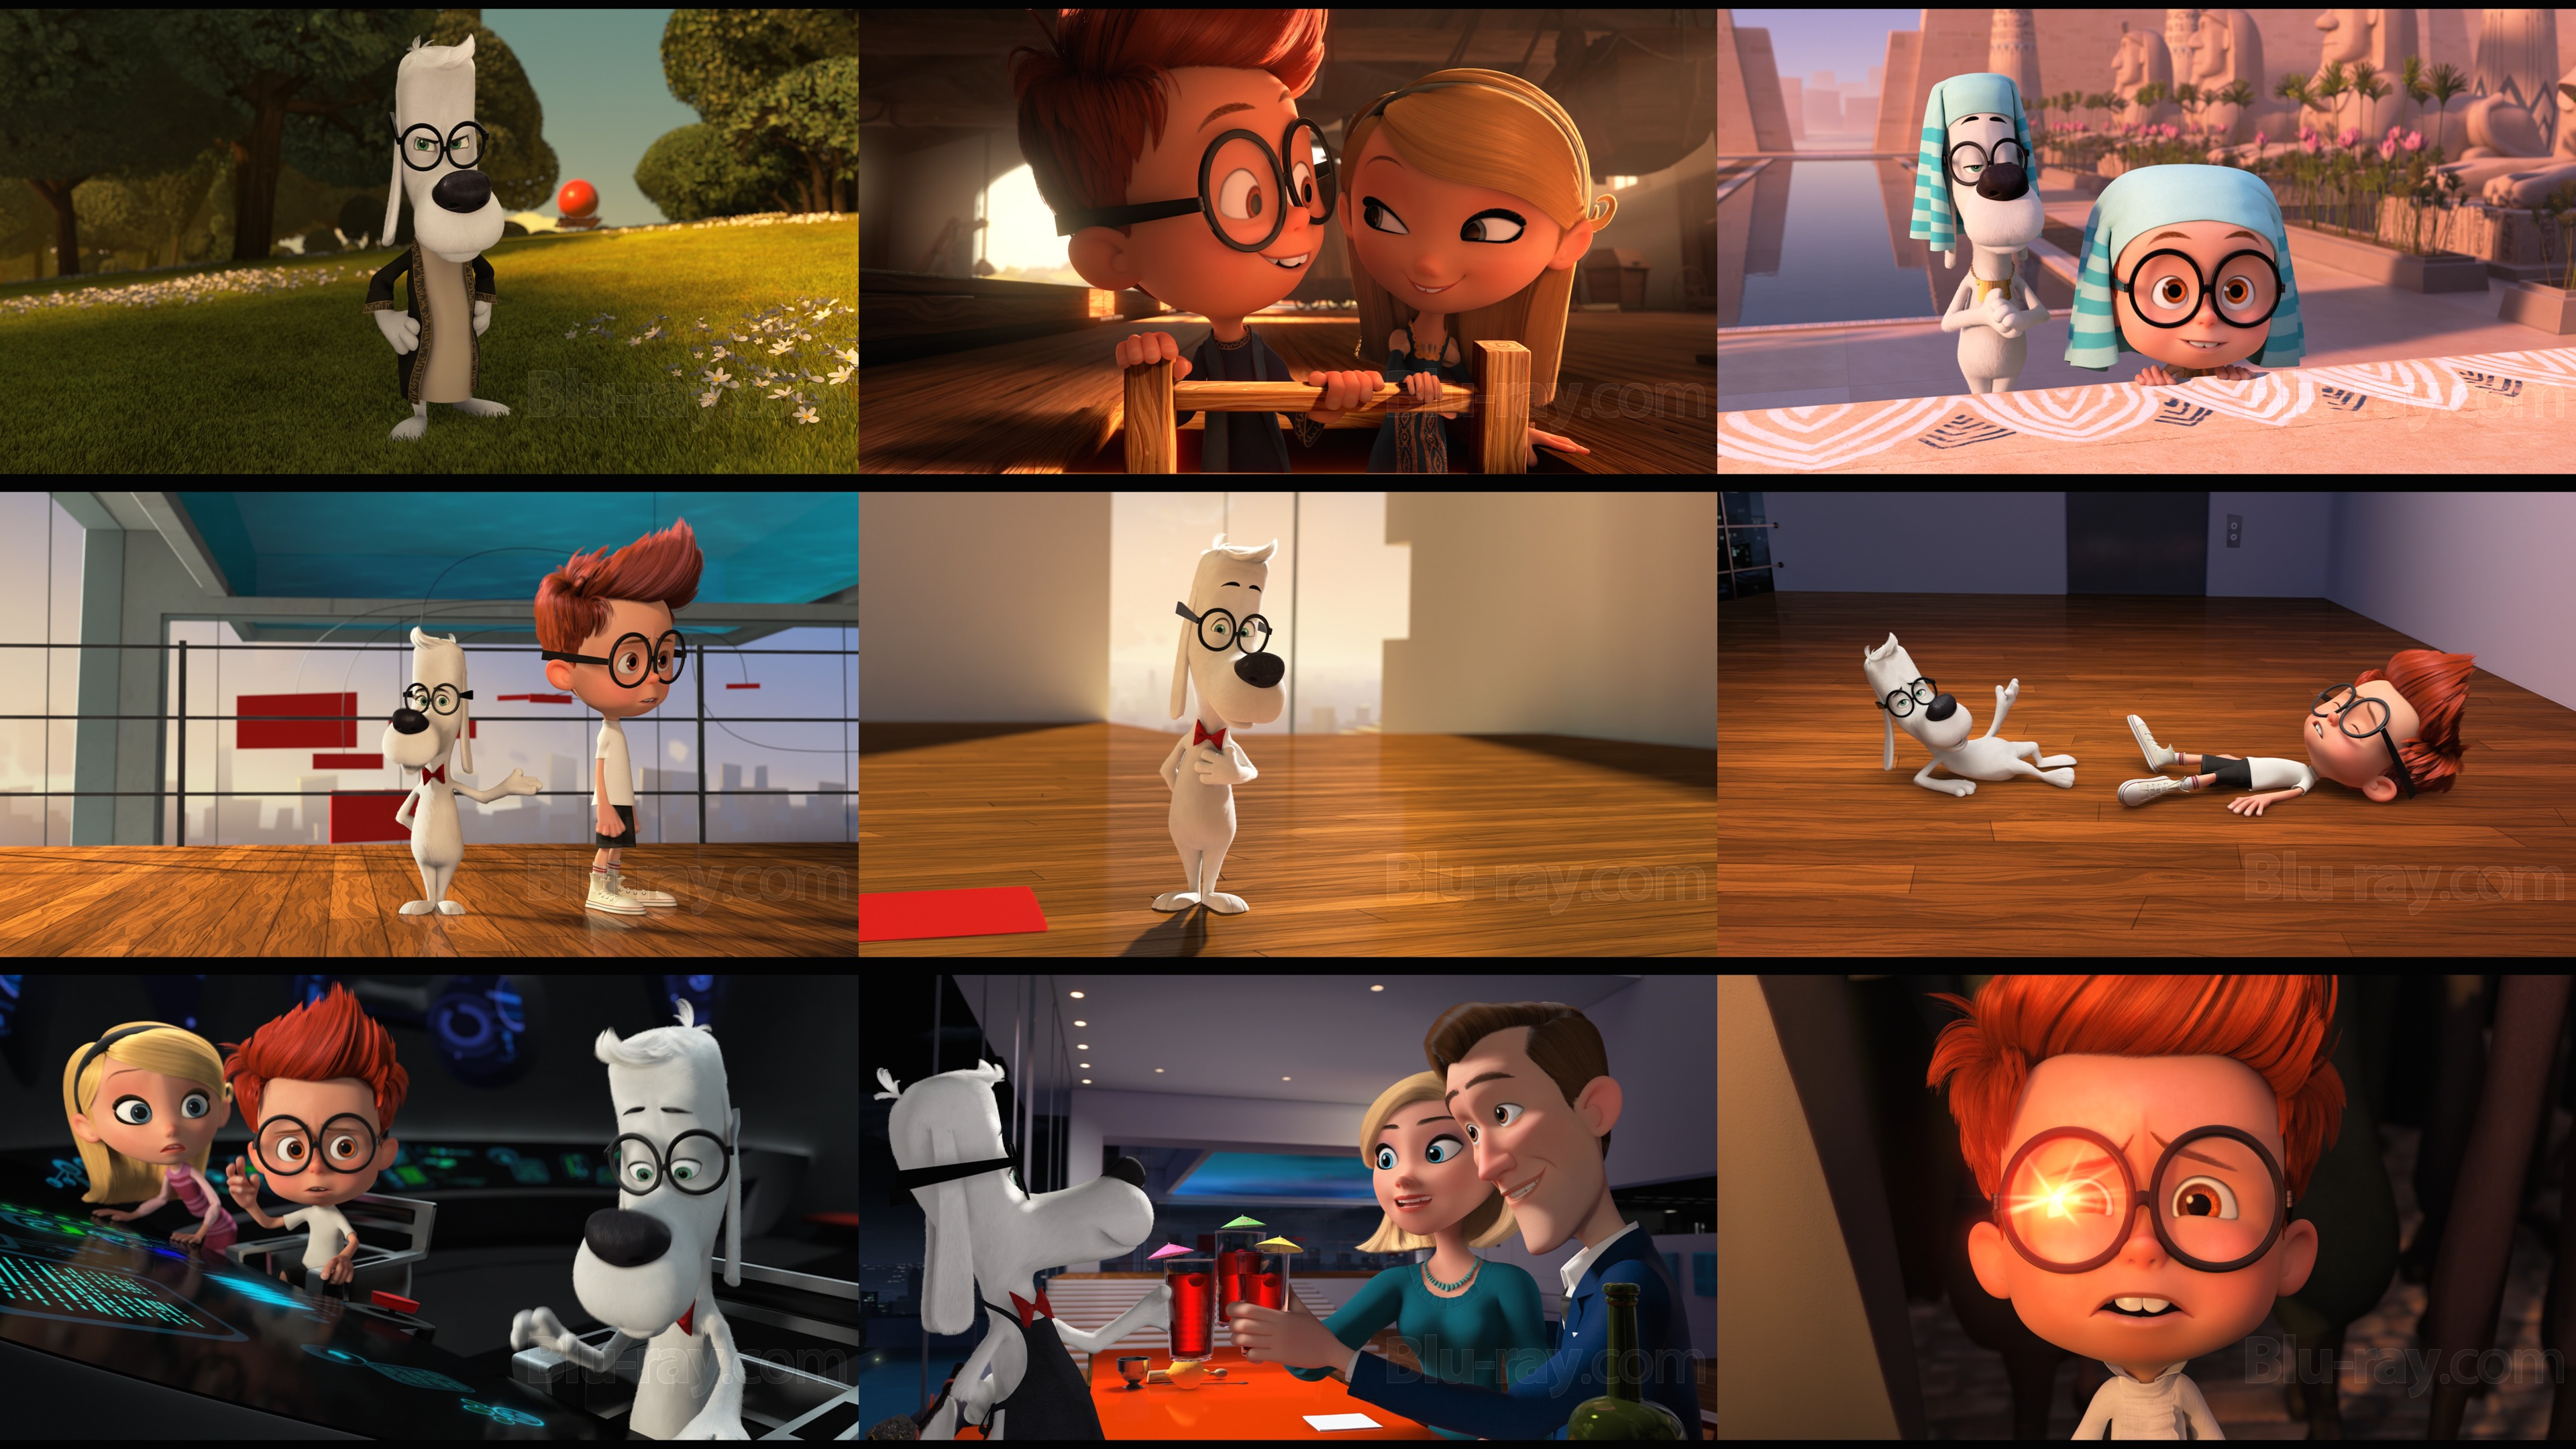 Mr Peabody And Sherman Wallpapers